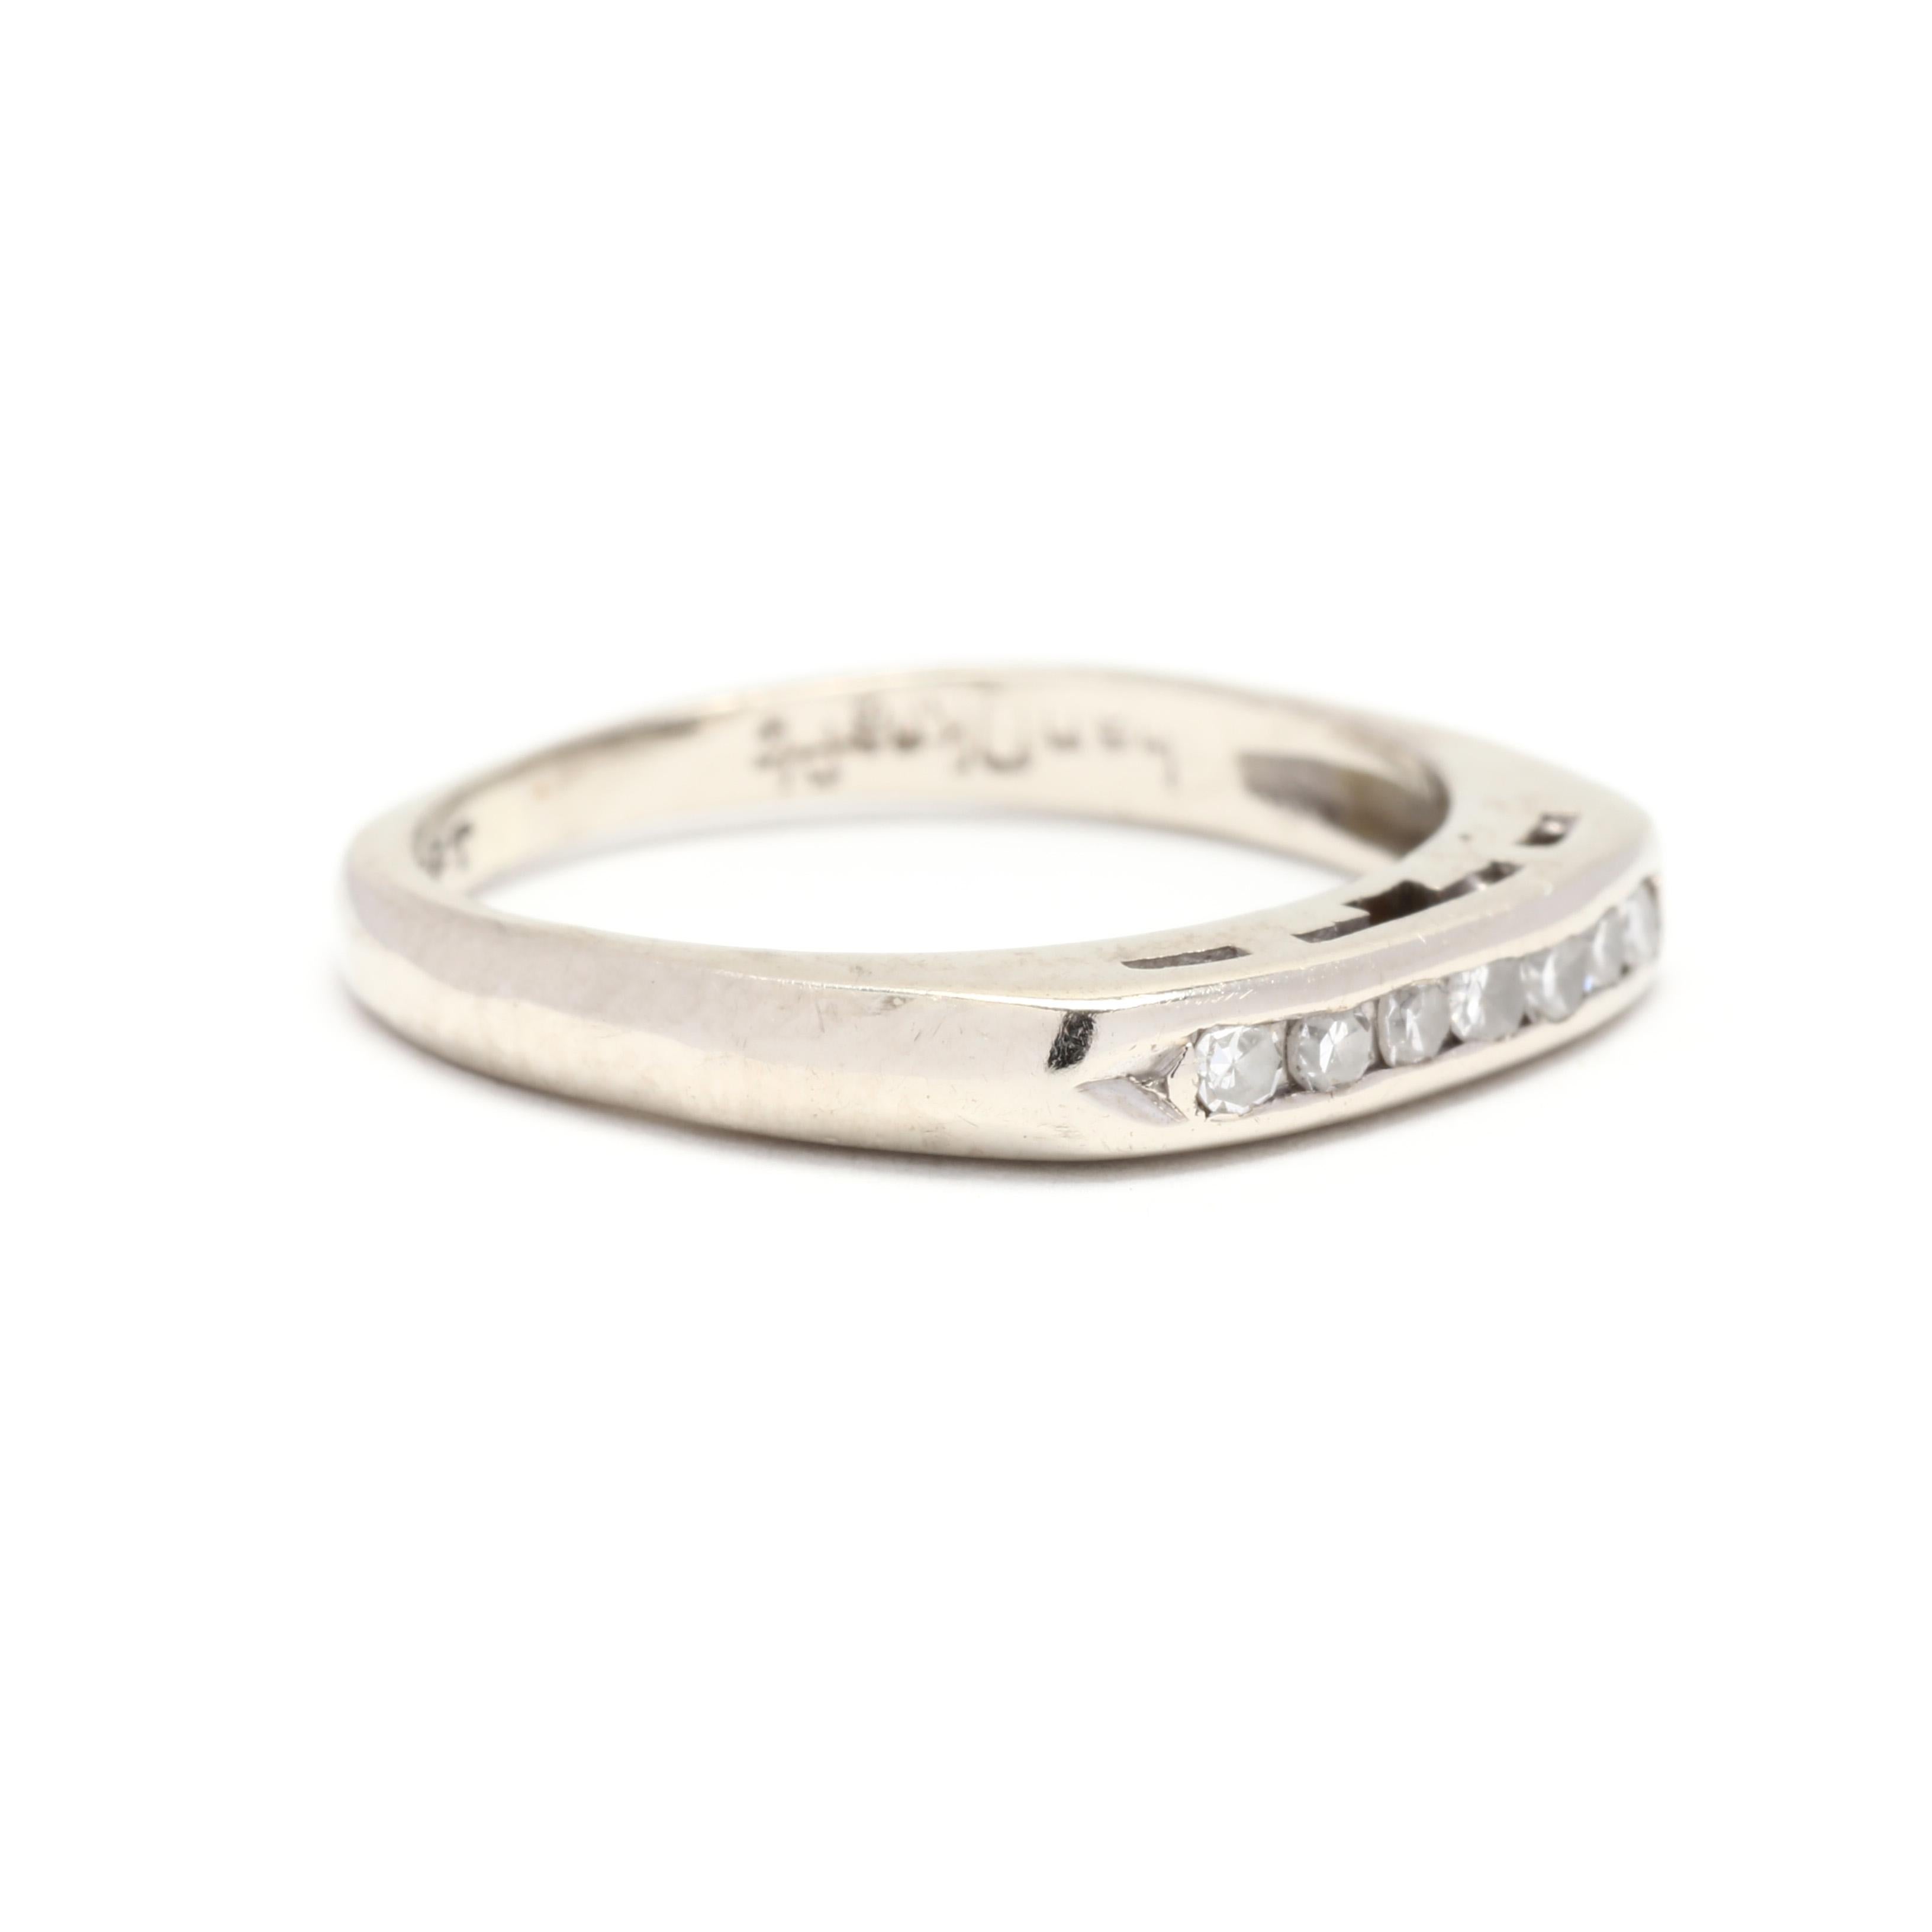 A vintage 14 karat white gold diamond band. This stackable band features seven channel set, single cut round diamonds weighing approximately .08 total carats and with a tapered band.



Stones:

- diamonds, 7 stones

- single cut round

- 1.5 mm

-